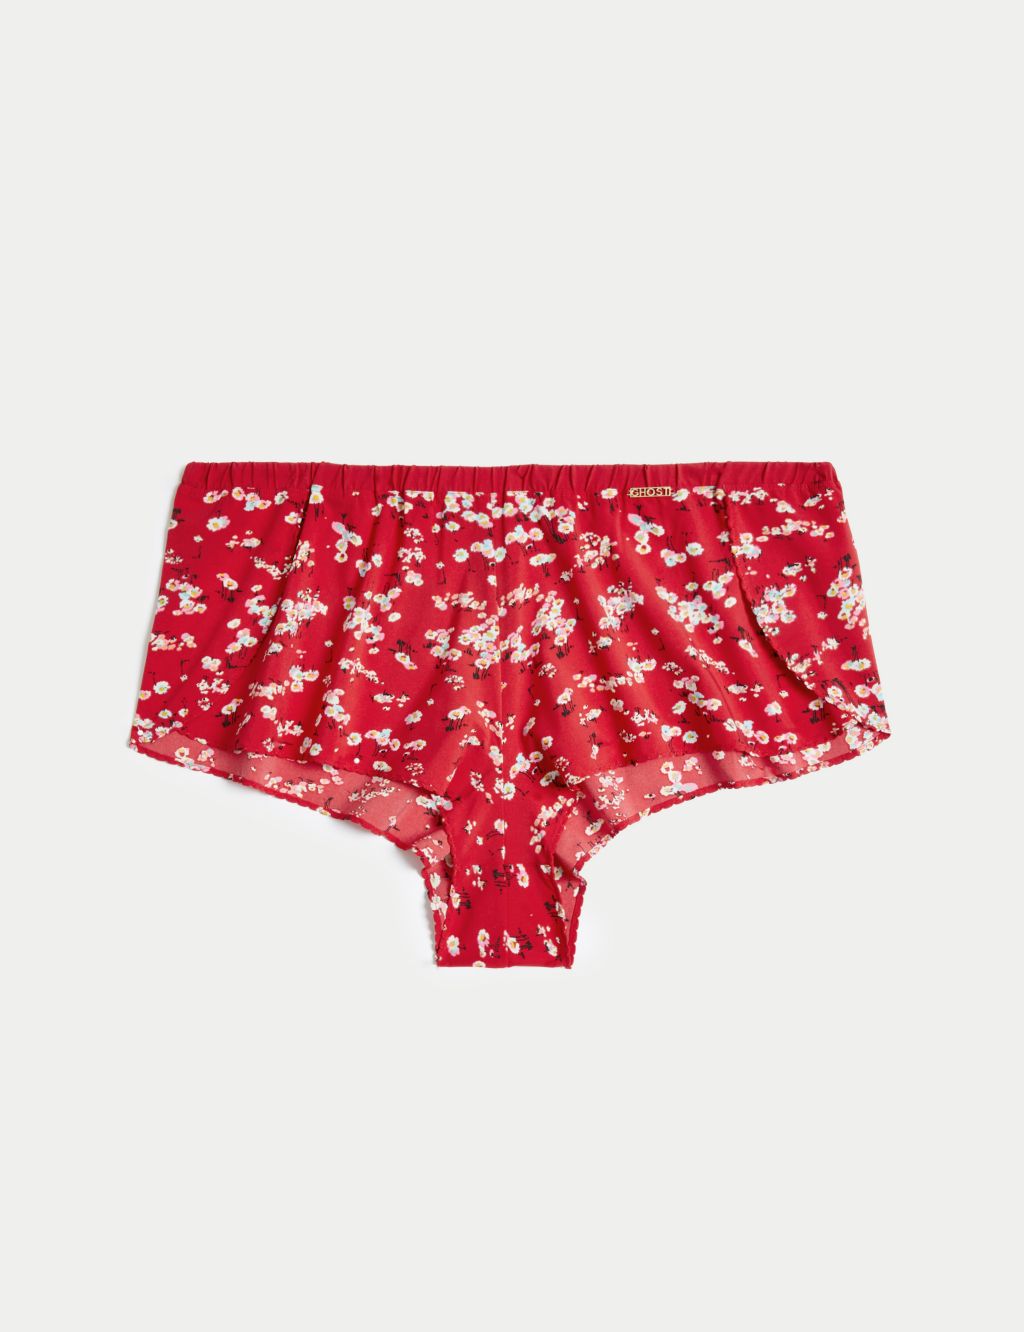 Tammy Floral High Waisted French Knickers image 2